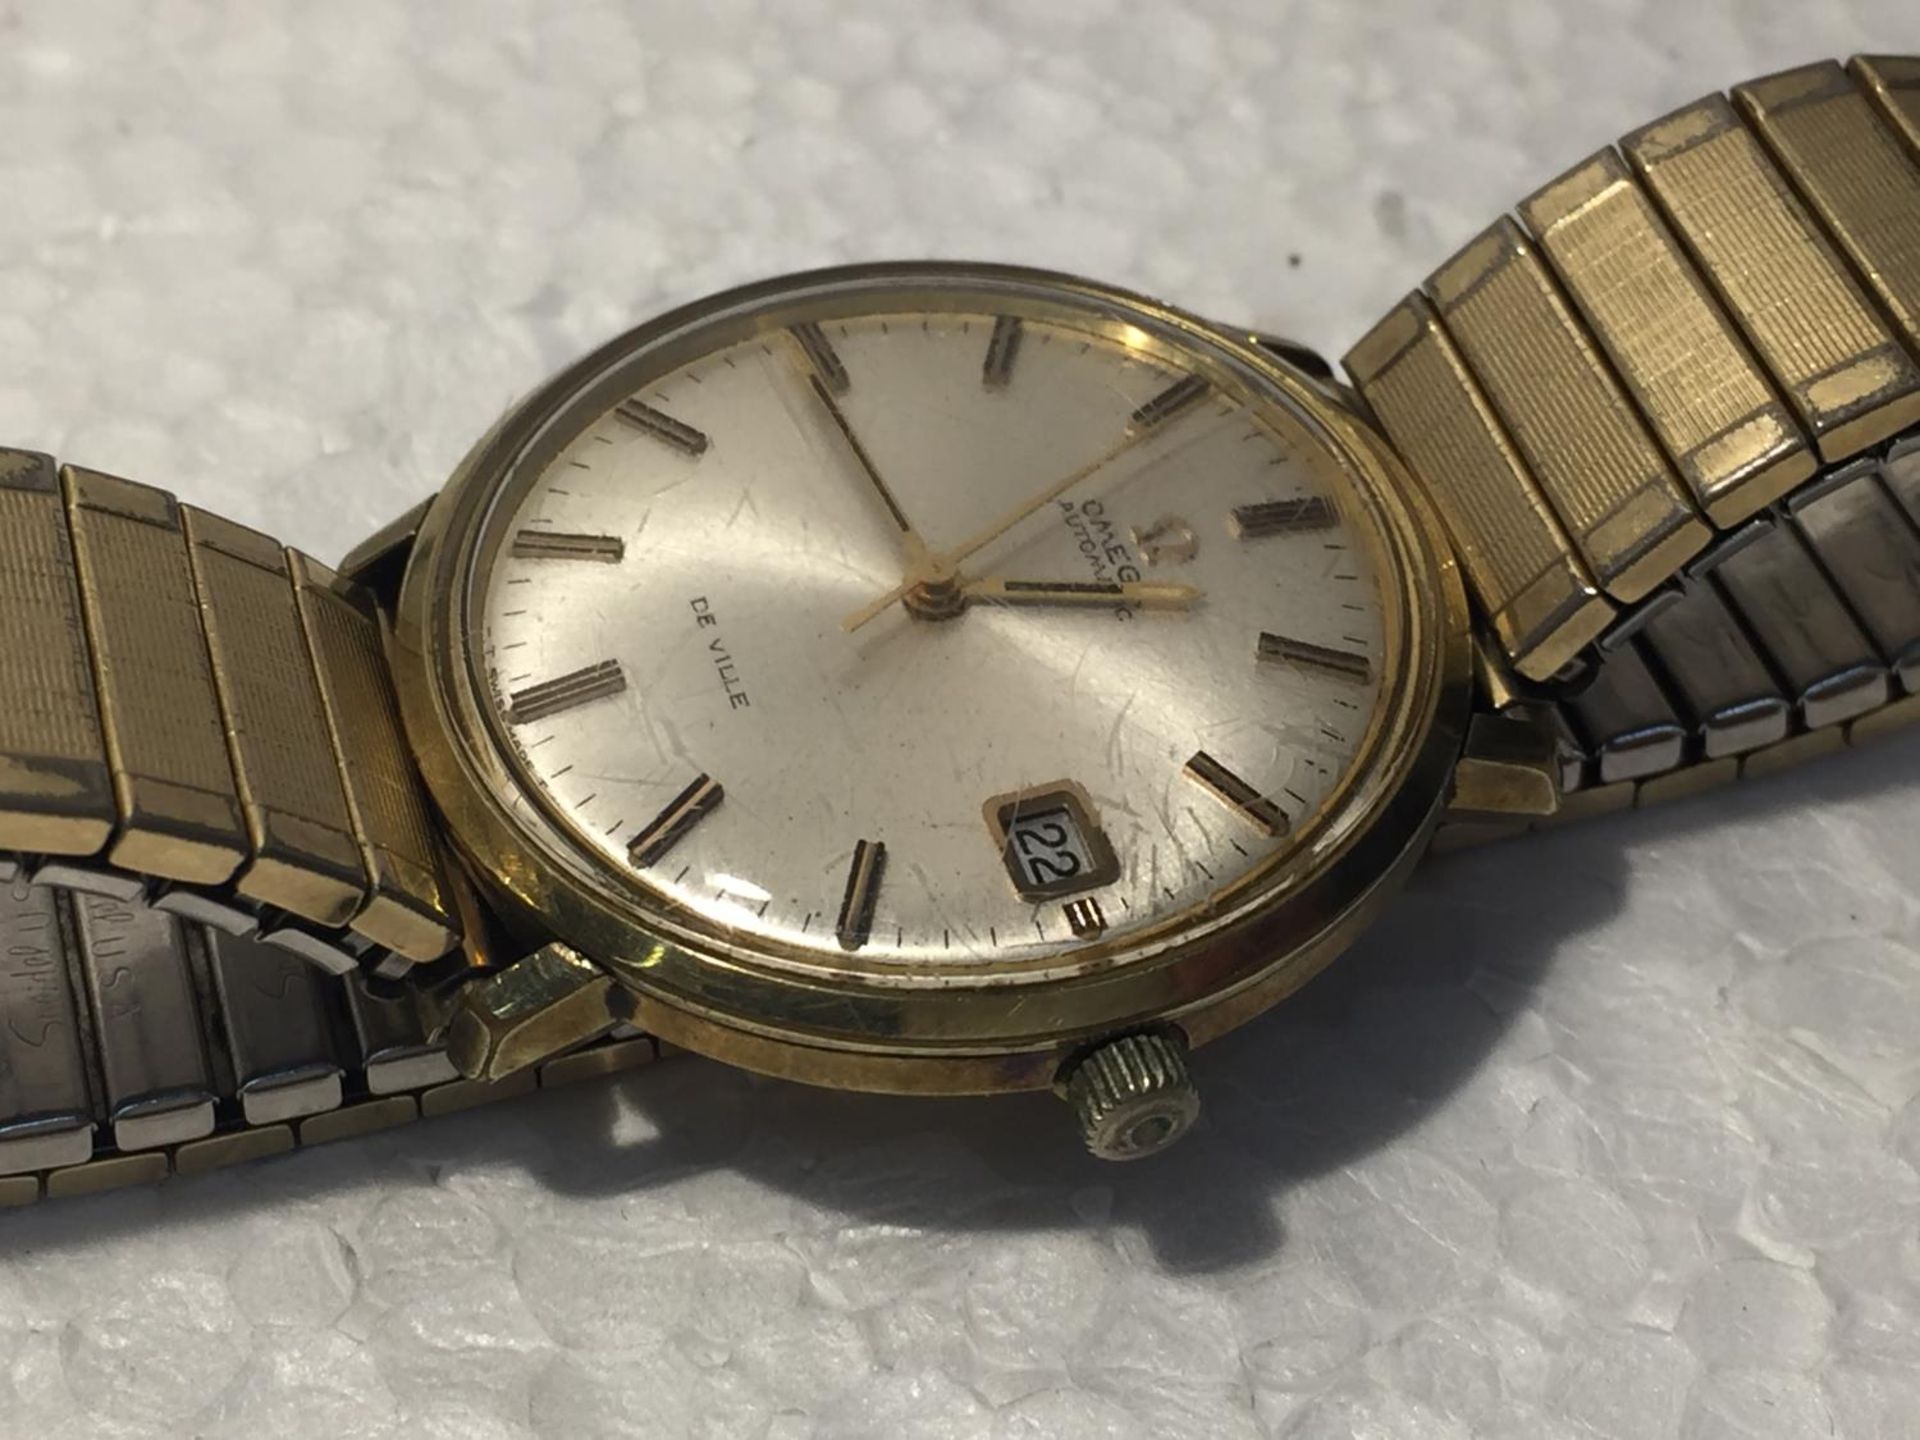 A VINTAGE OMEGA AUTOMATIC DE VILLE WATCH POSSIBLY 9CT GOLD WRIST WATCH IN WORKING ORDER WHEN - Image 3 of 7